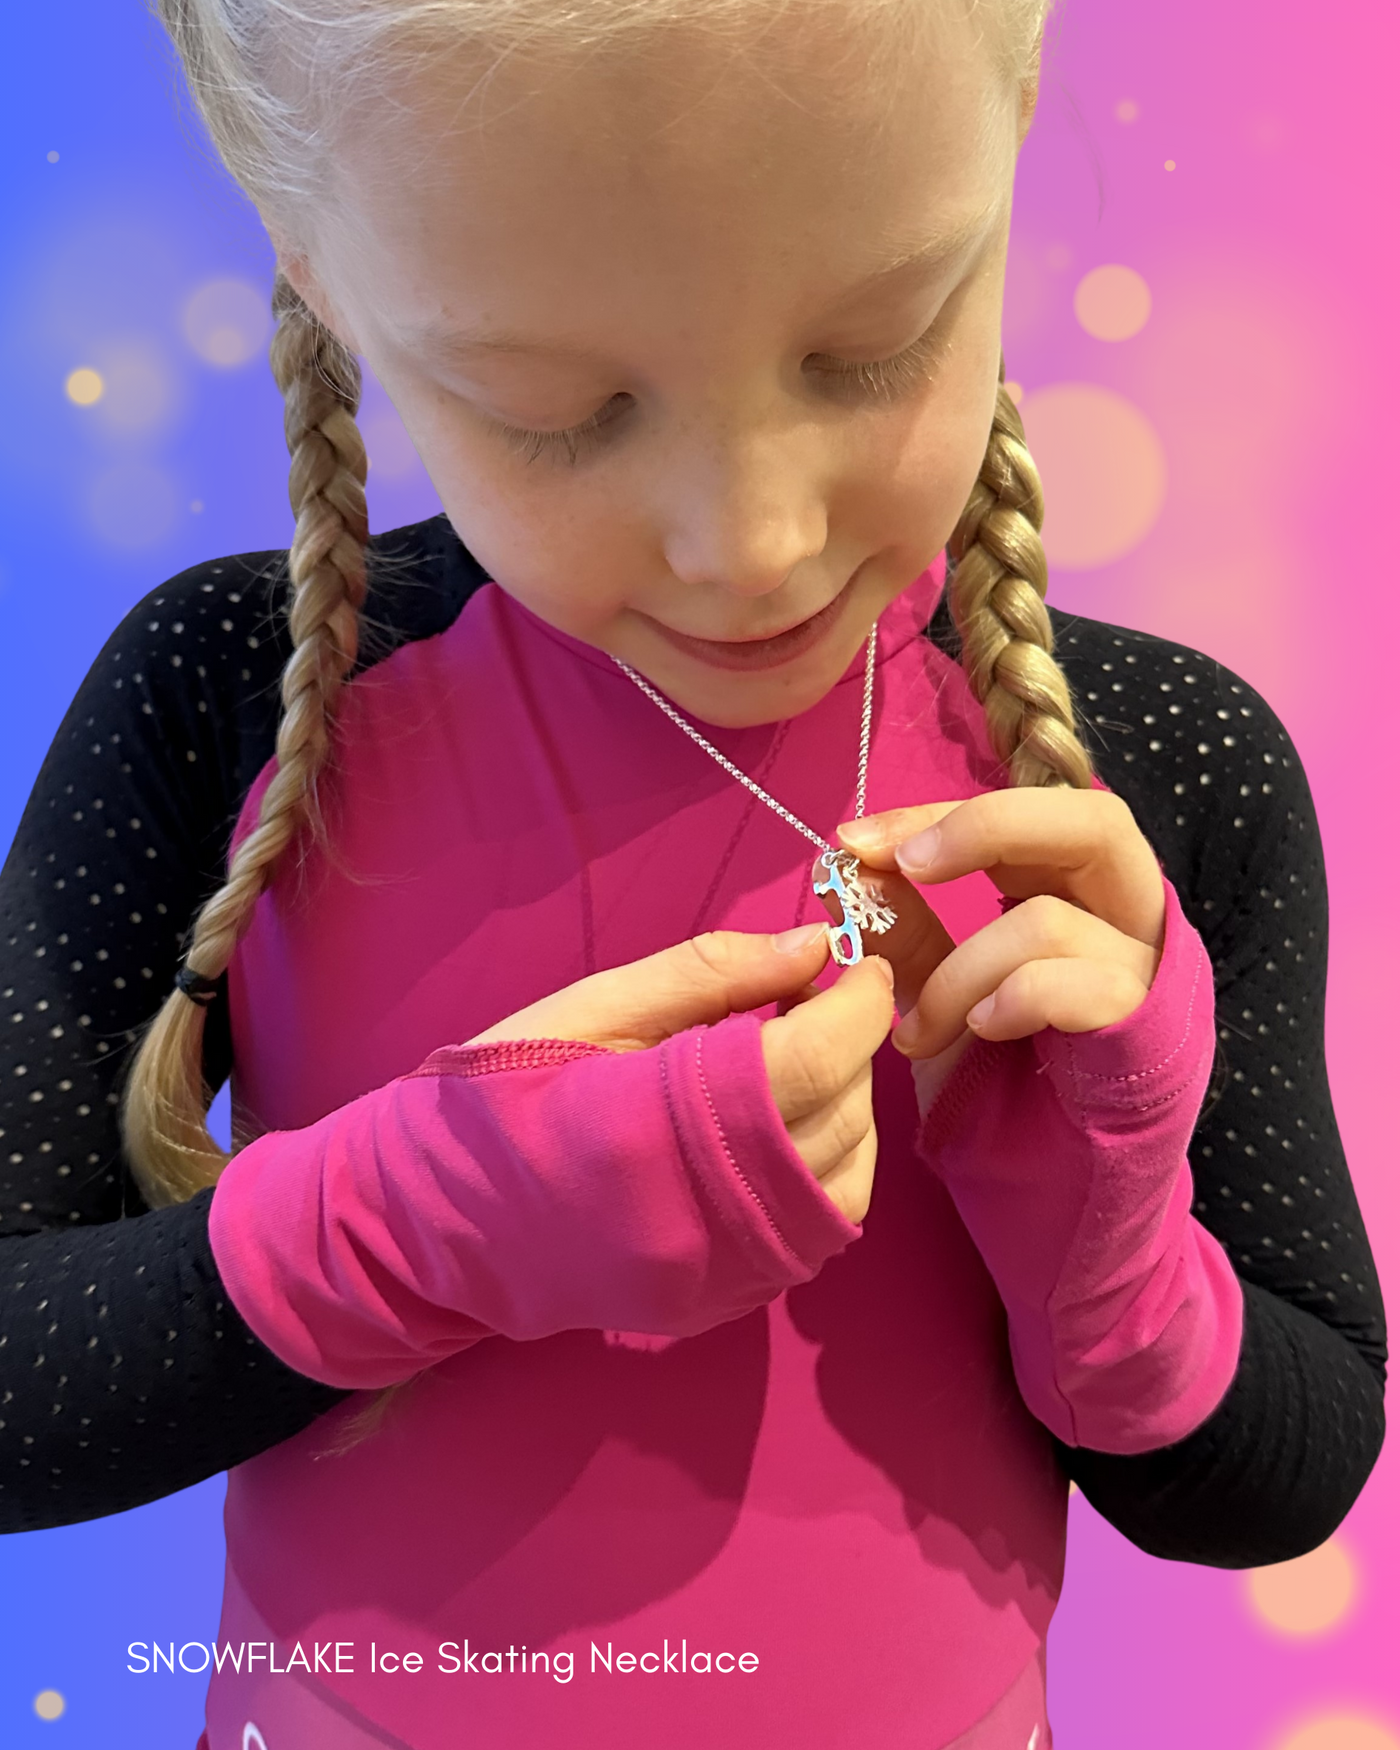 Figure skater looking at a Snowflake silver ice skating necklace